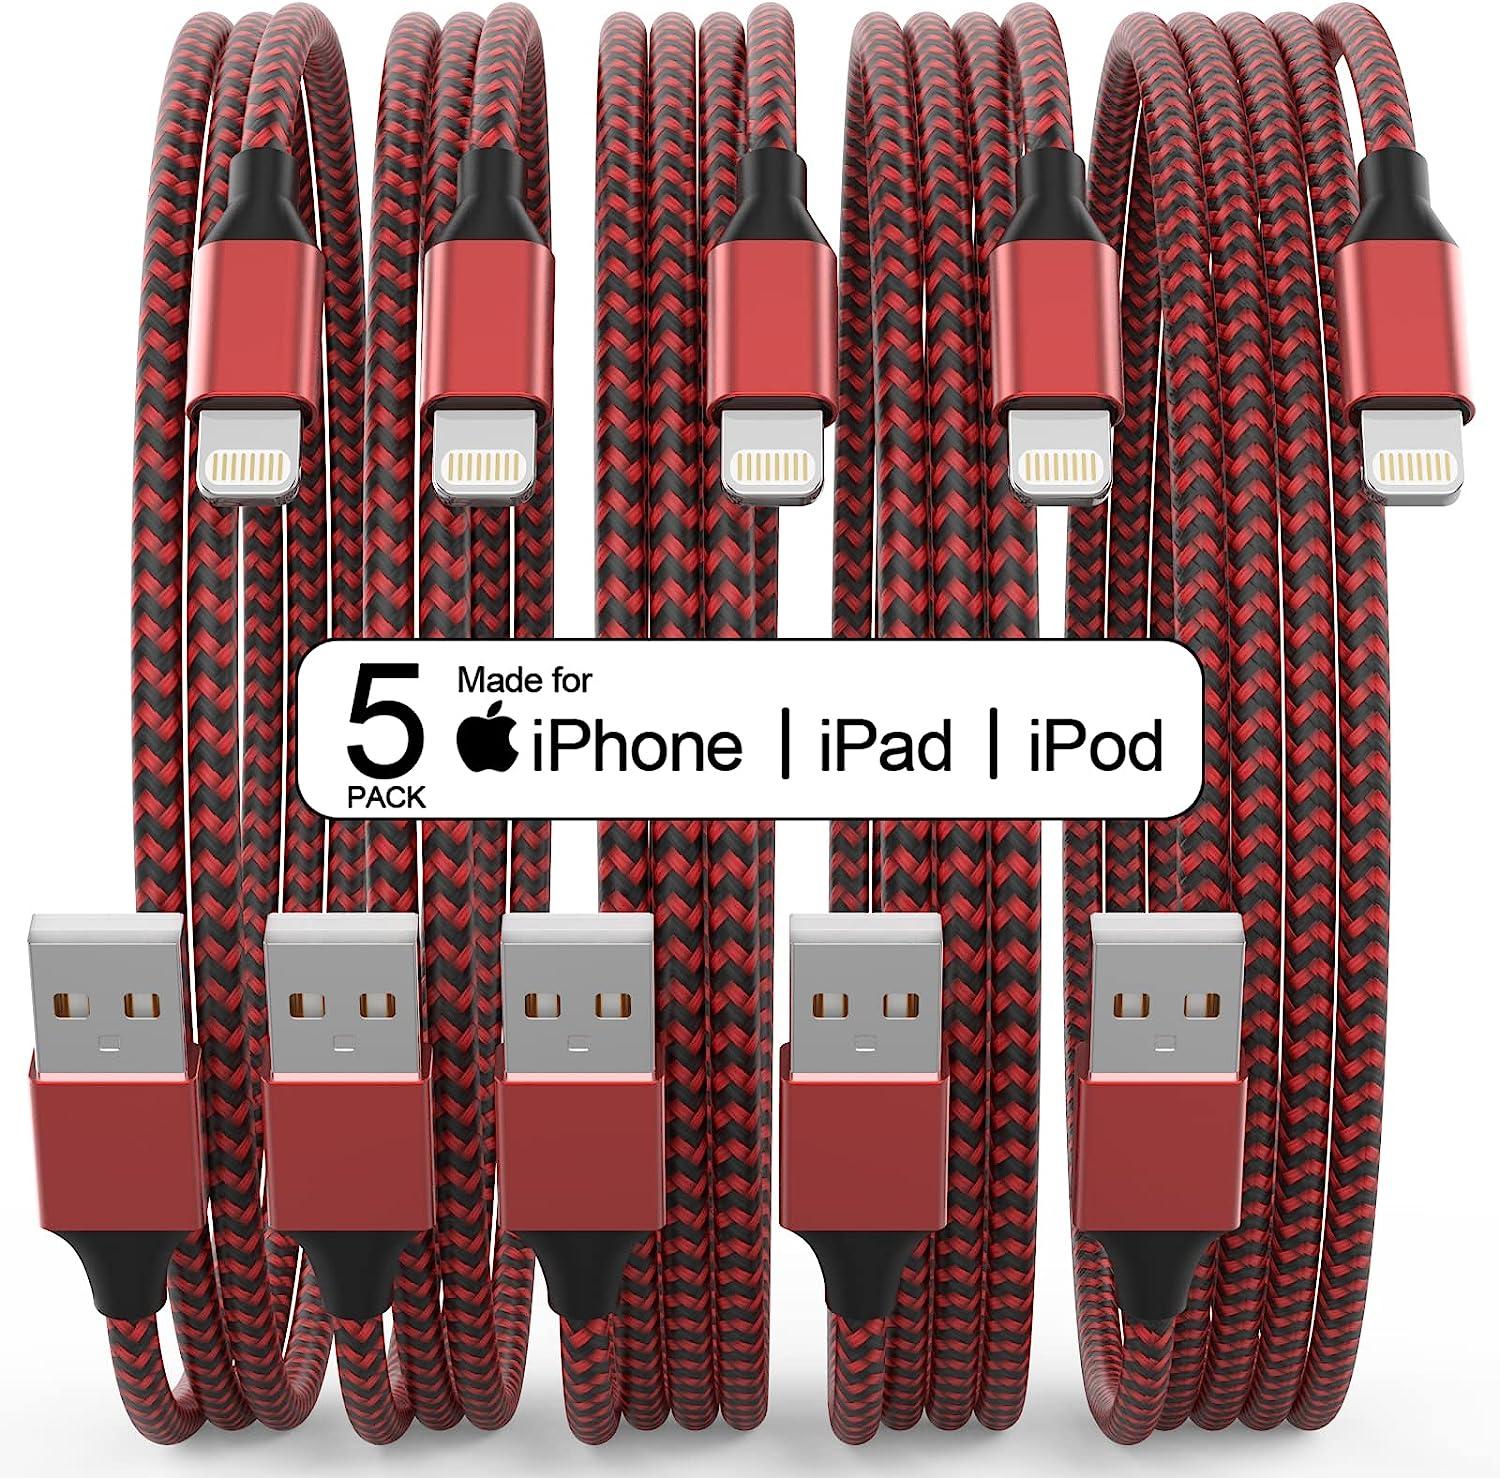 Apple iPhone Nylon Braided USB-A to Lightning Charging Cables 5 Pack for $5.99